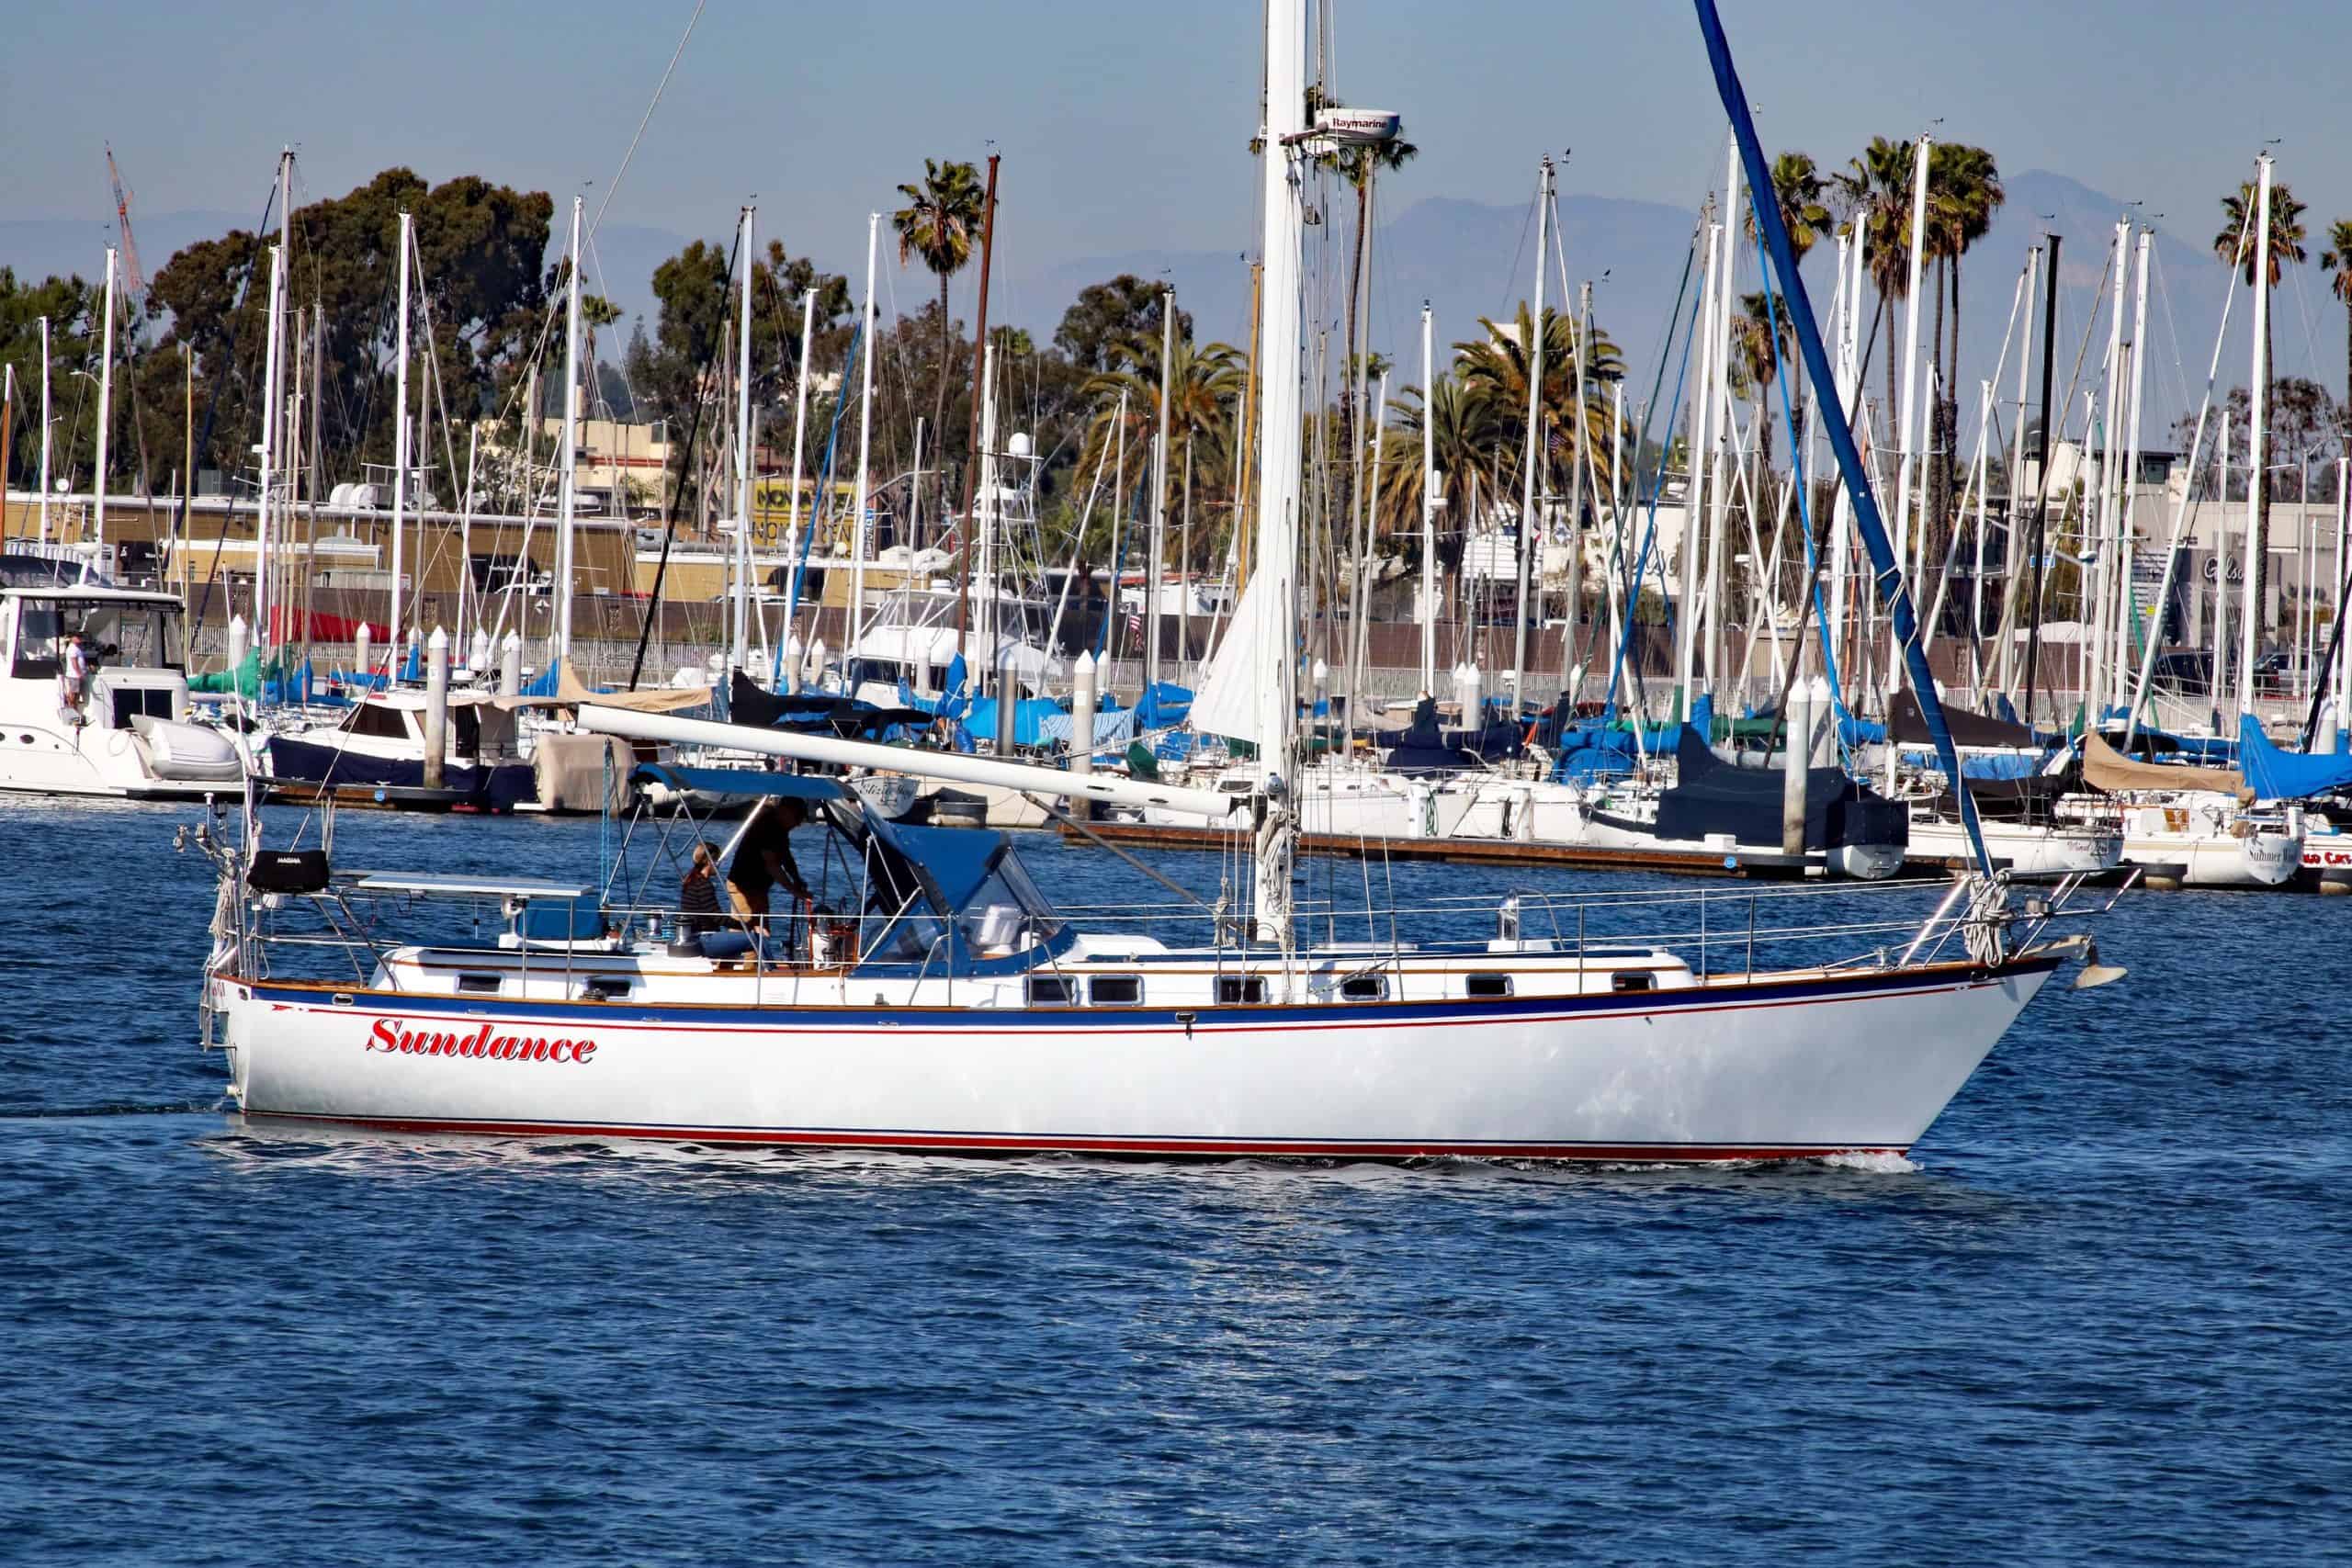 kelly peterson 46 sailboat for sale by owner